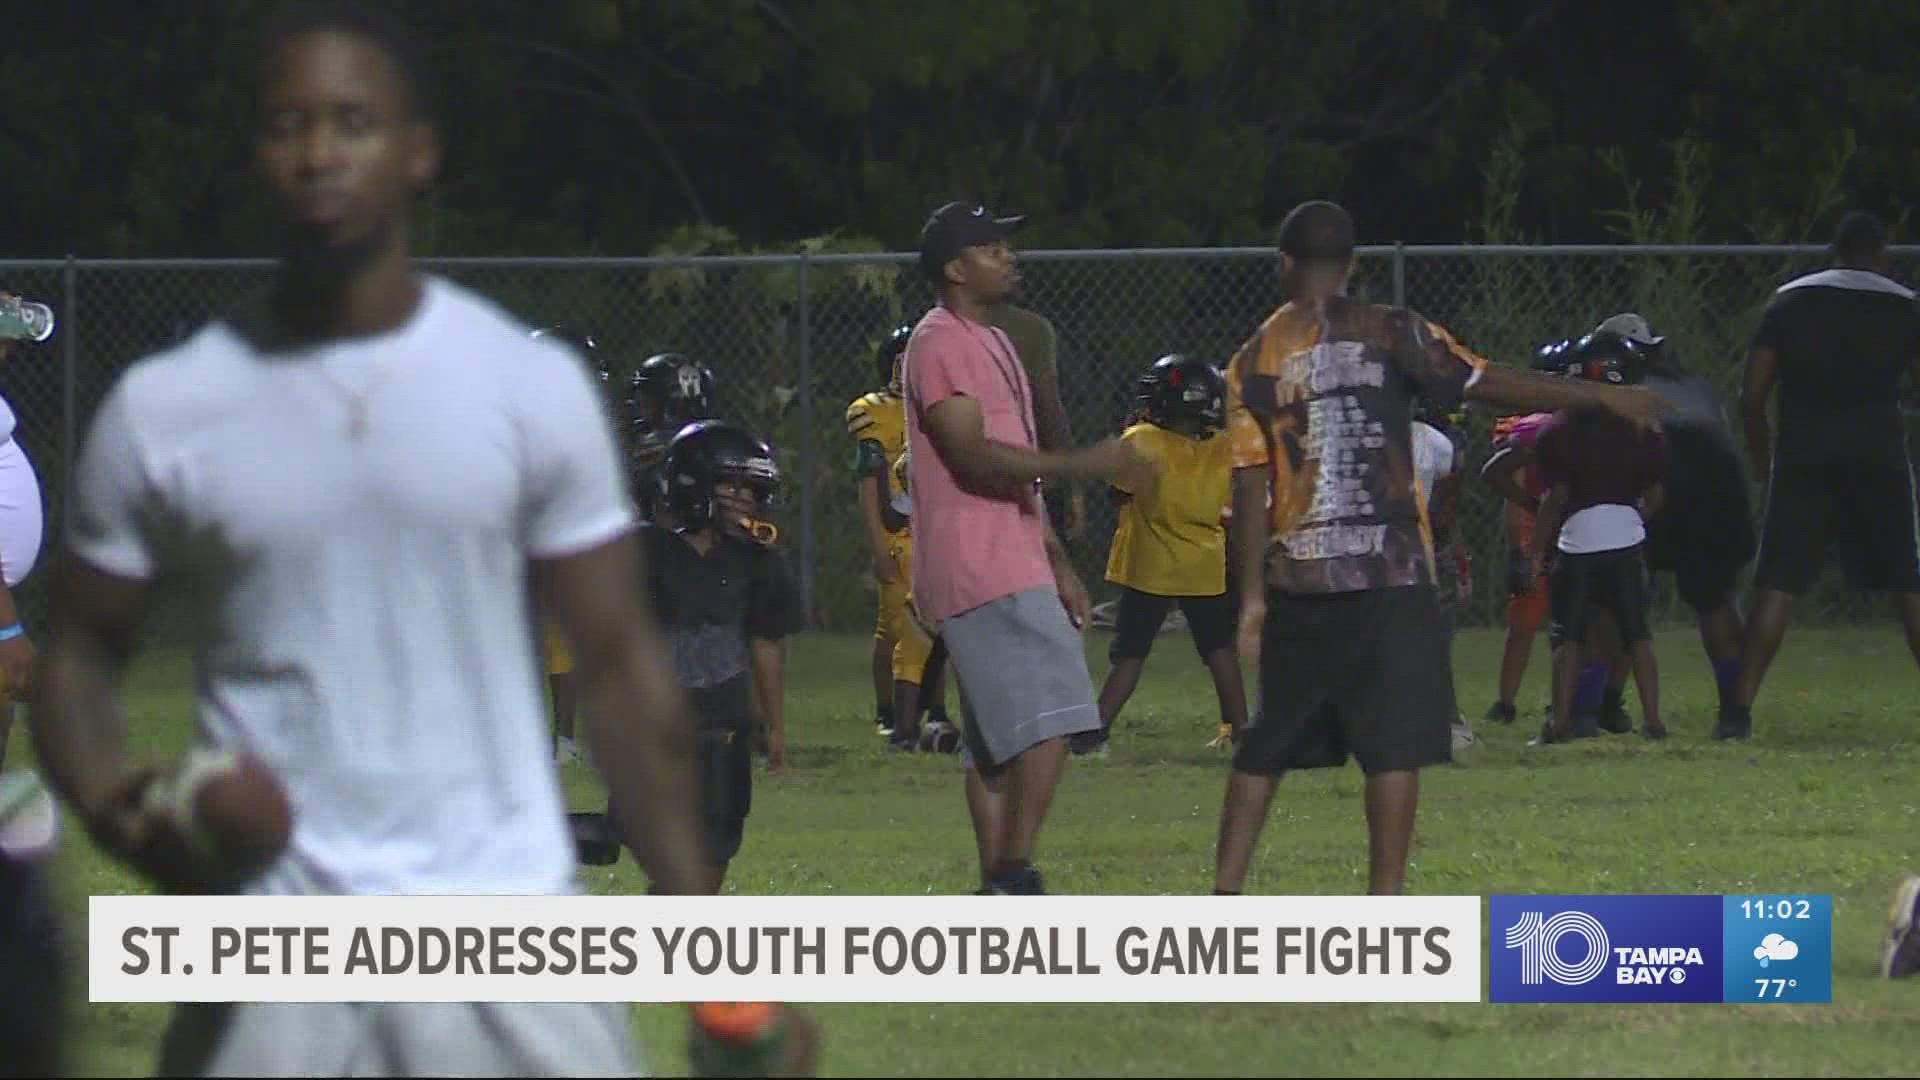 A meeting was held after a large fight broke out at a game between St. Pete and Lakewood.